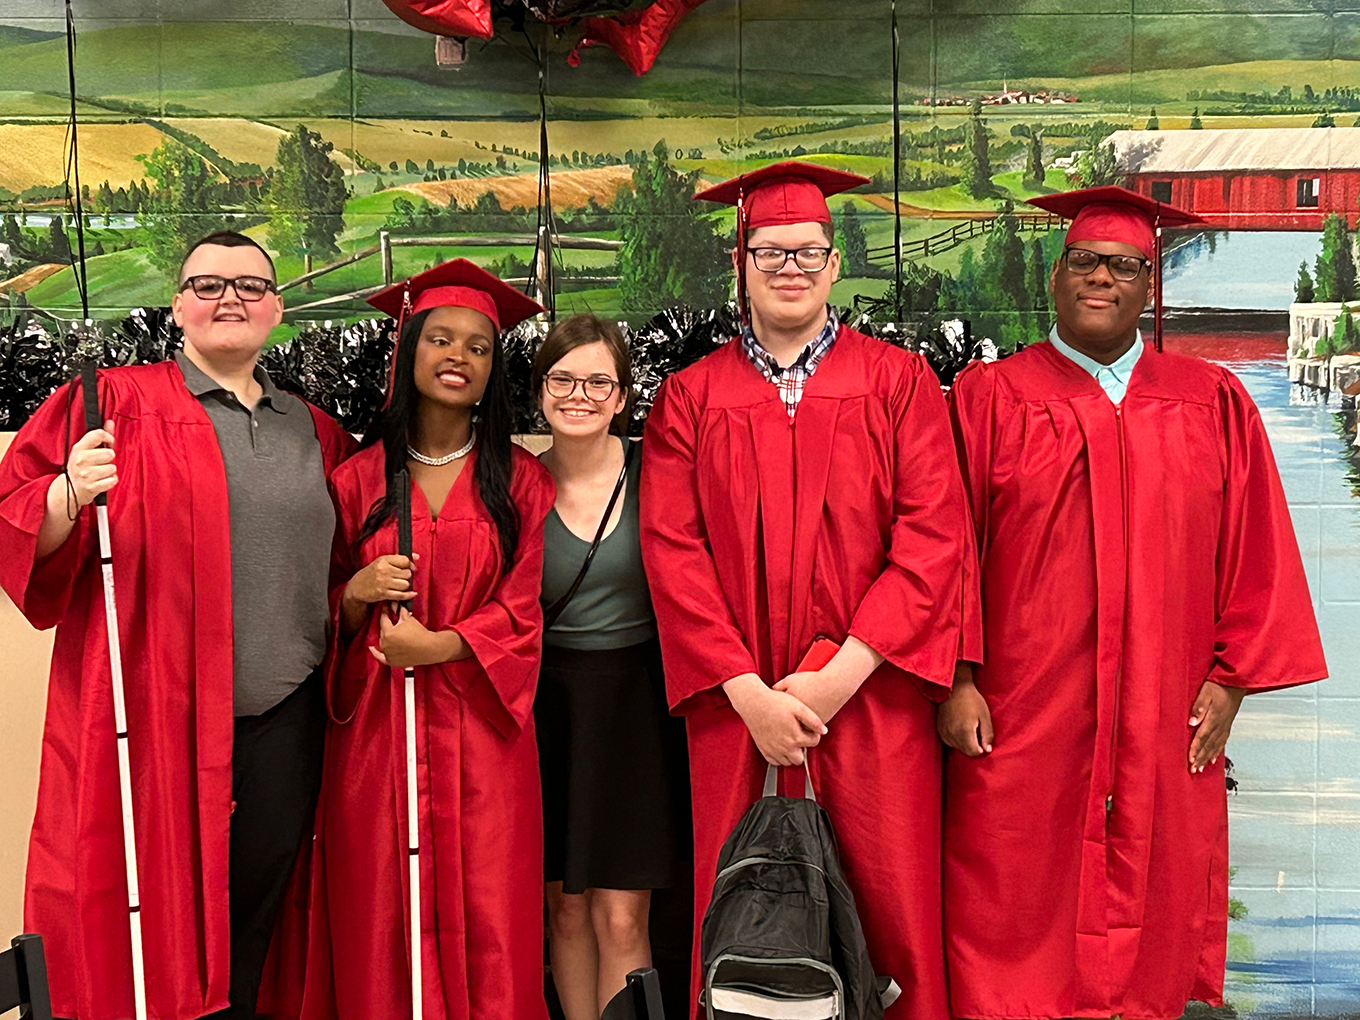 Five people, including four in red graduation gowns, pose for a photo